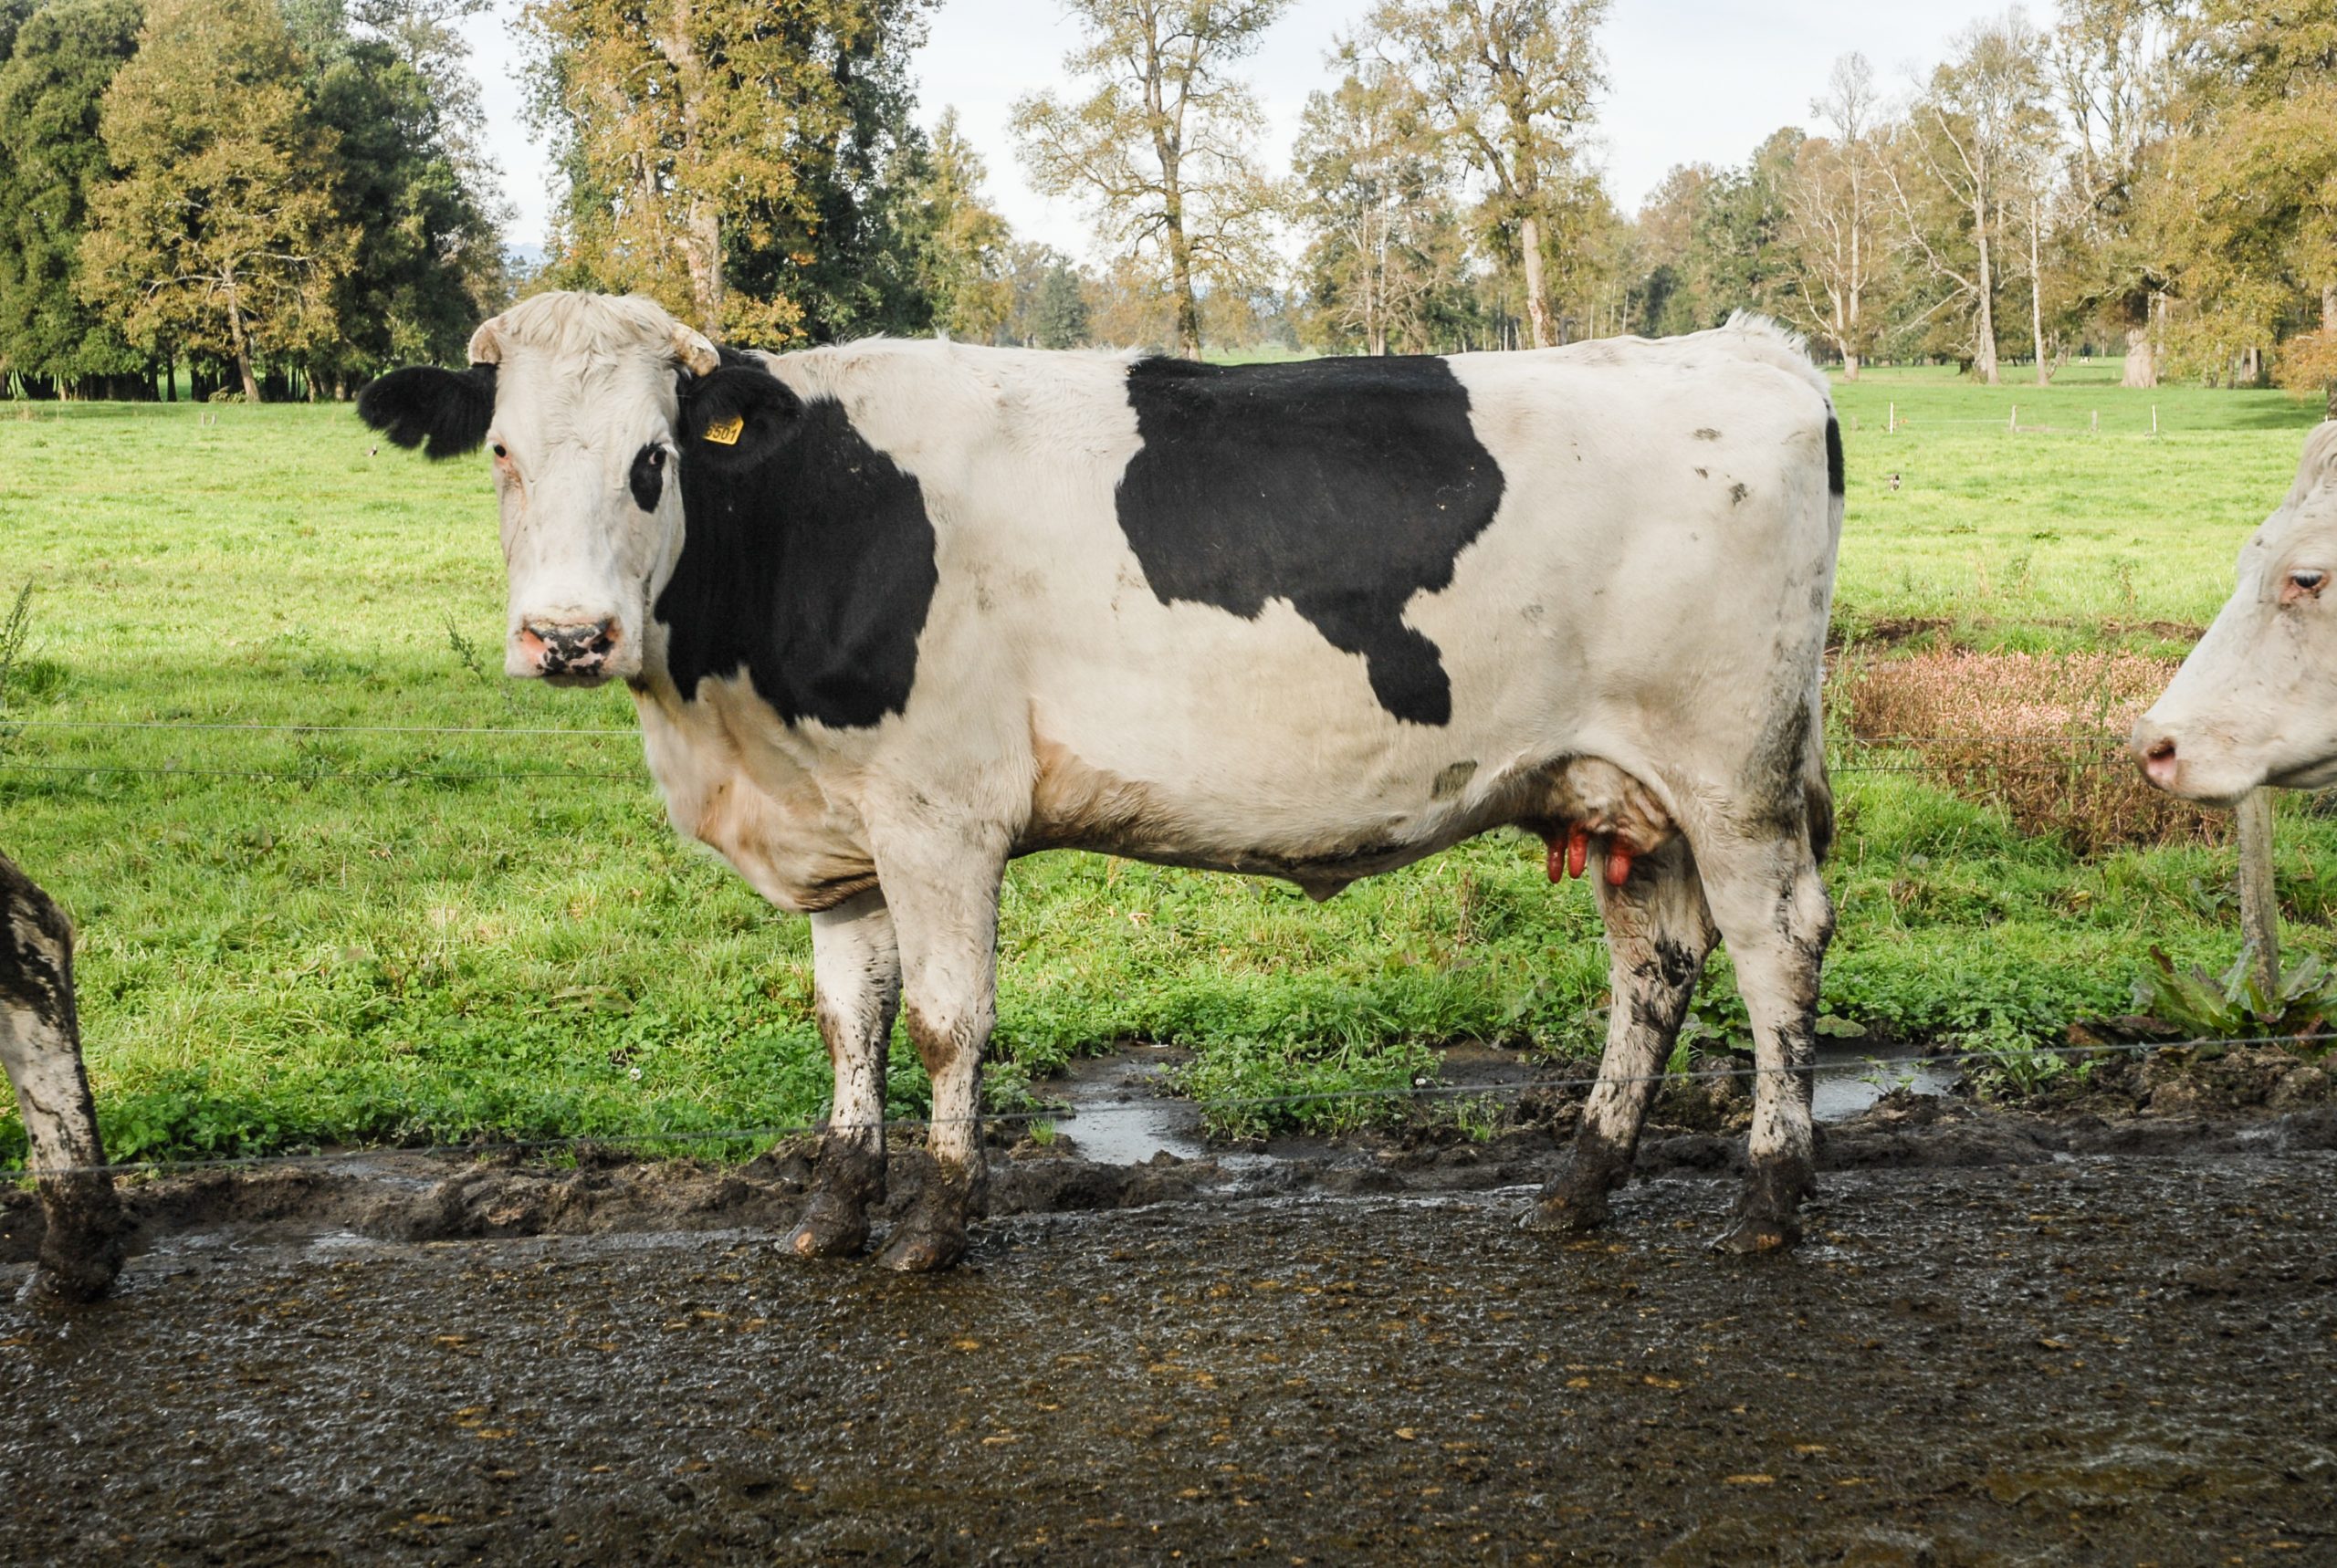 Report on the evaluation of the germicidal power of cow guard nipple antiseptic 2